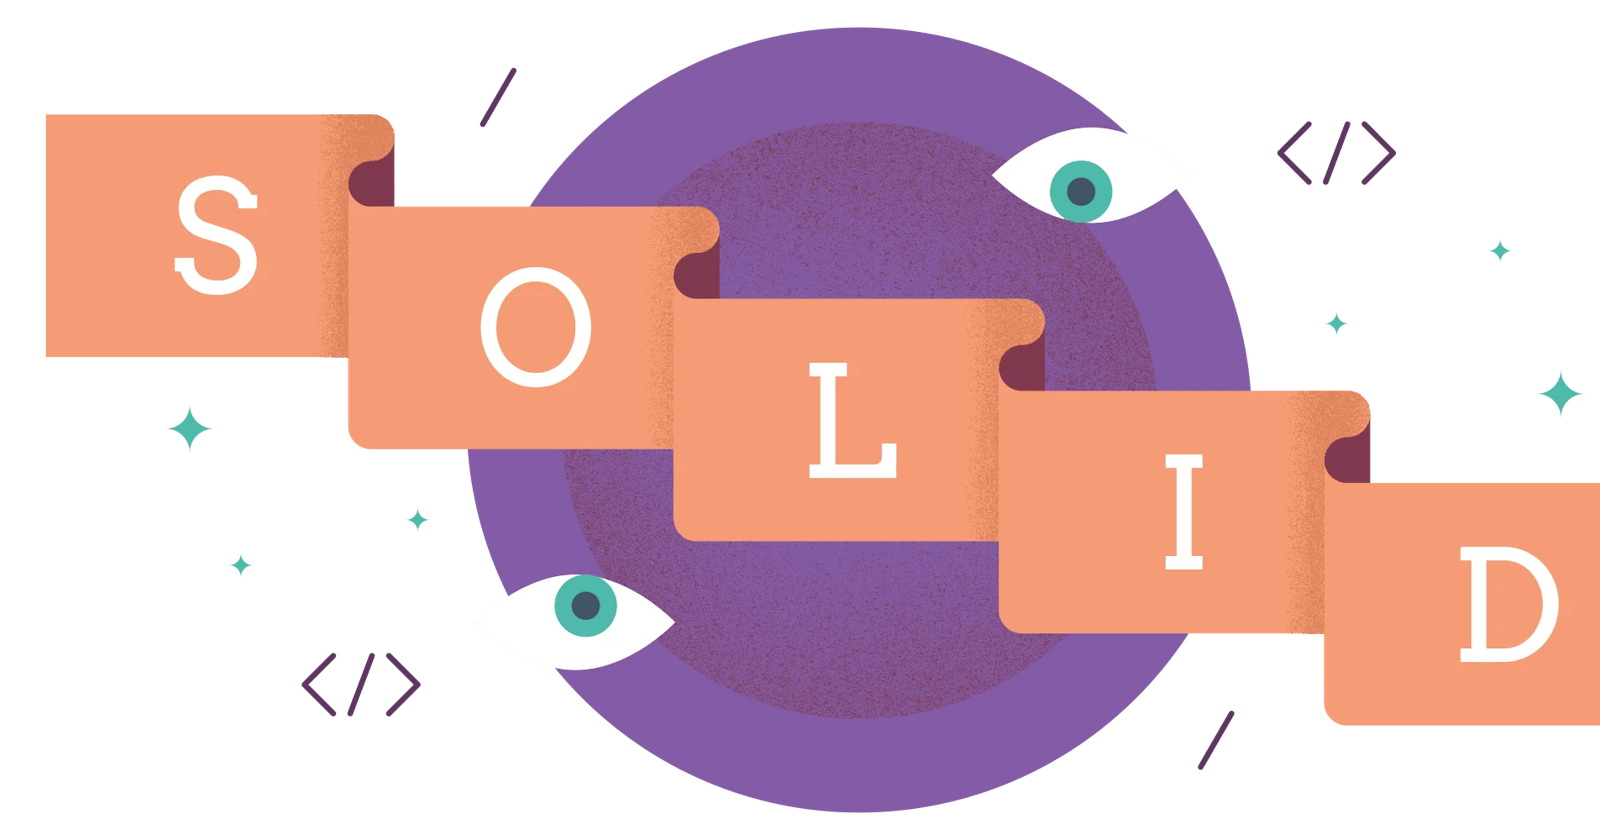 S.O.L.I.D Principles - The Practical Guide